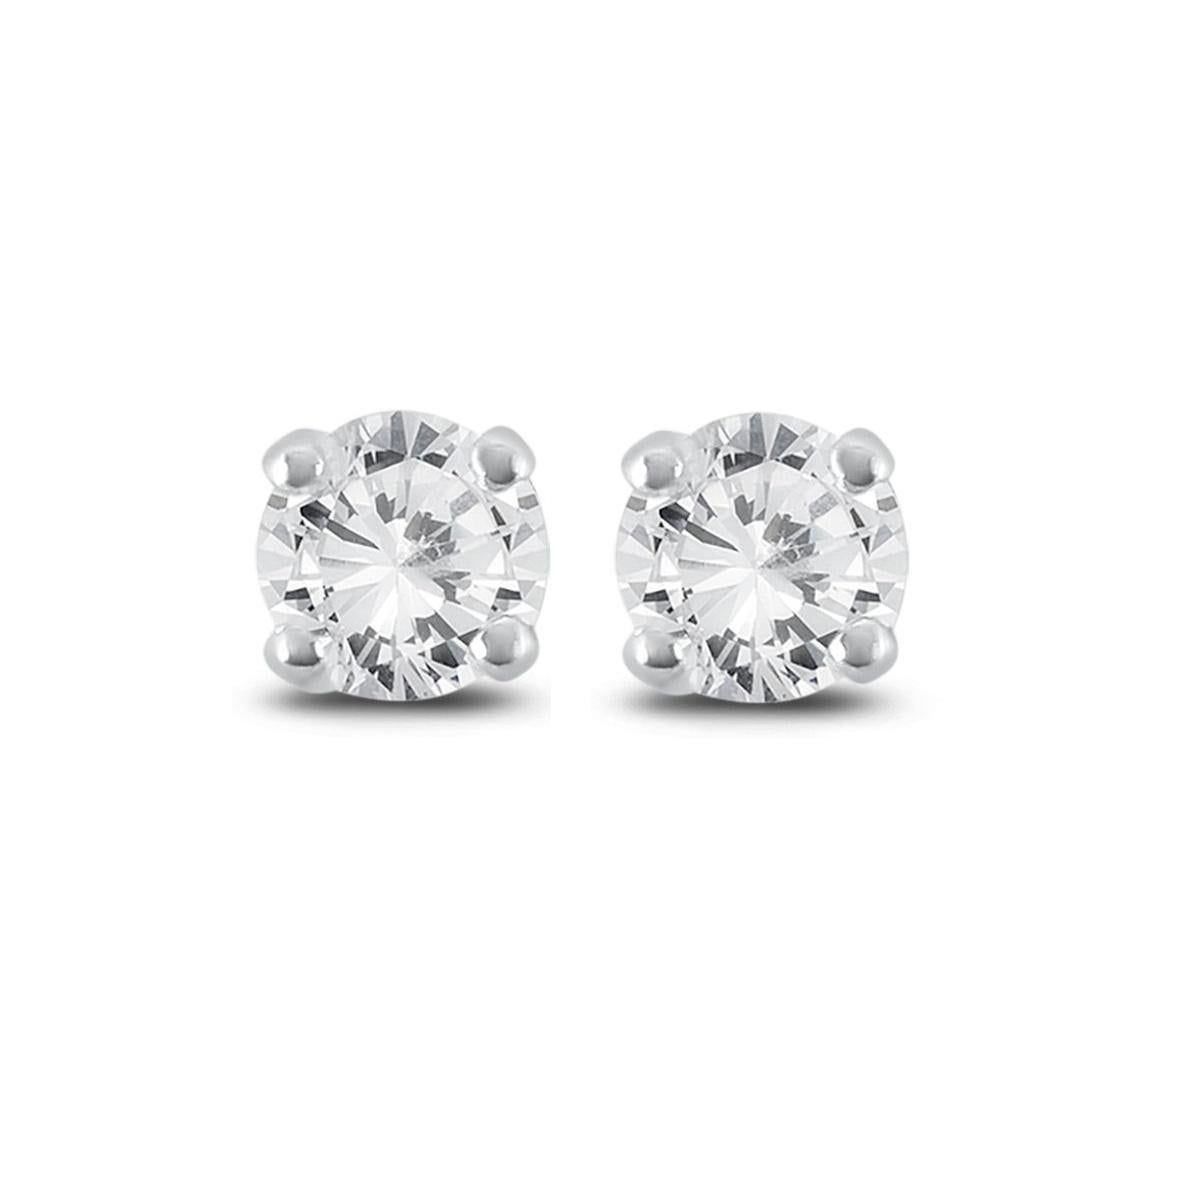 14K White Gold Diamond Earrings featuring 0.15 Carat T.W. of Natural Diamonds

Underline your look with this sharp 14K White Gold Diamond Earrings. High quality Diamonds. This Earrings will underline your exquisite look for any occasion.

. is a